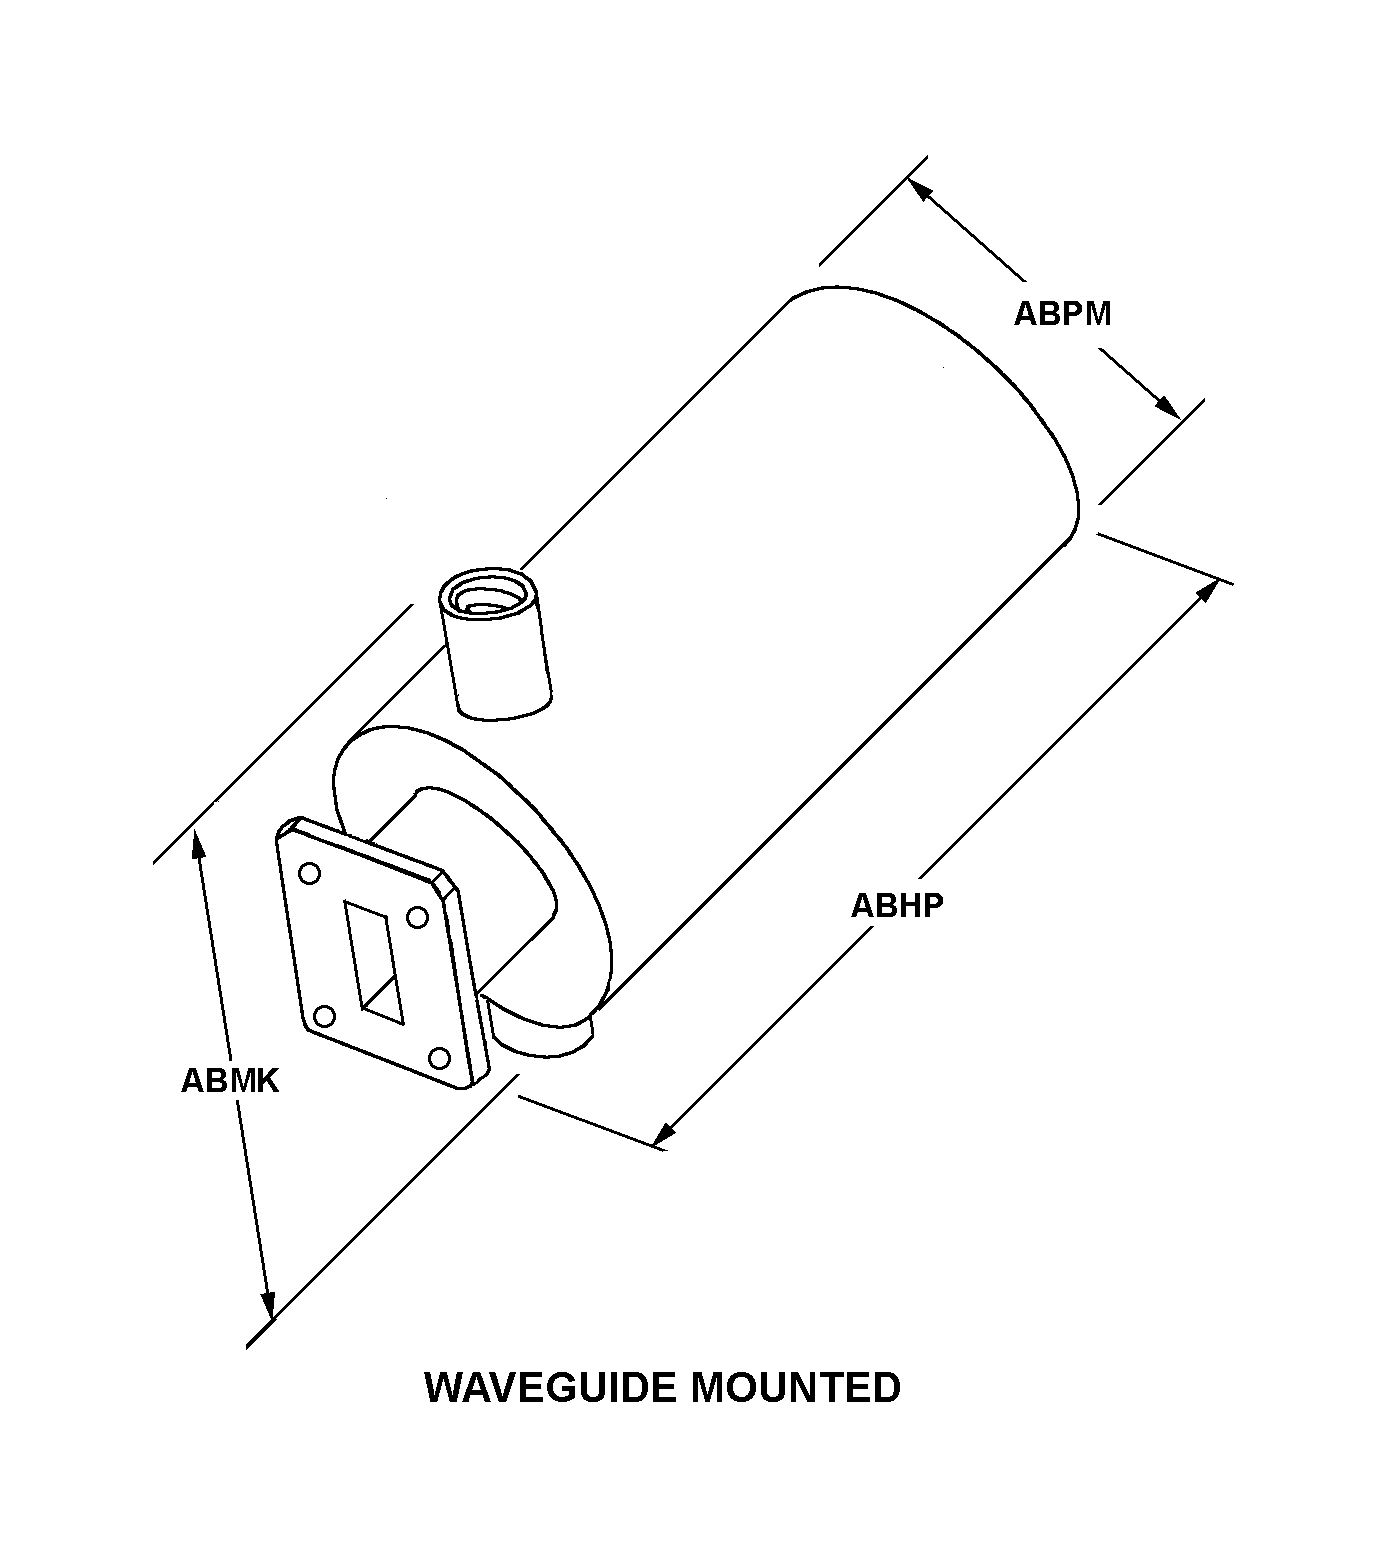 WAVEGUIDE MOUNTED style nsn 5985-00-177-3633